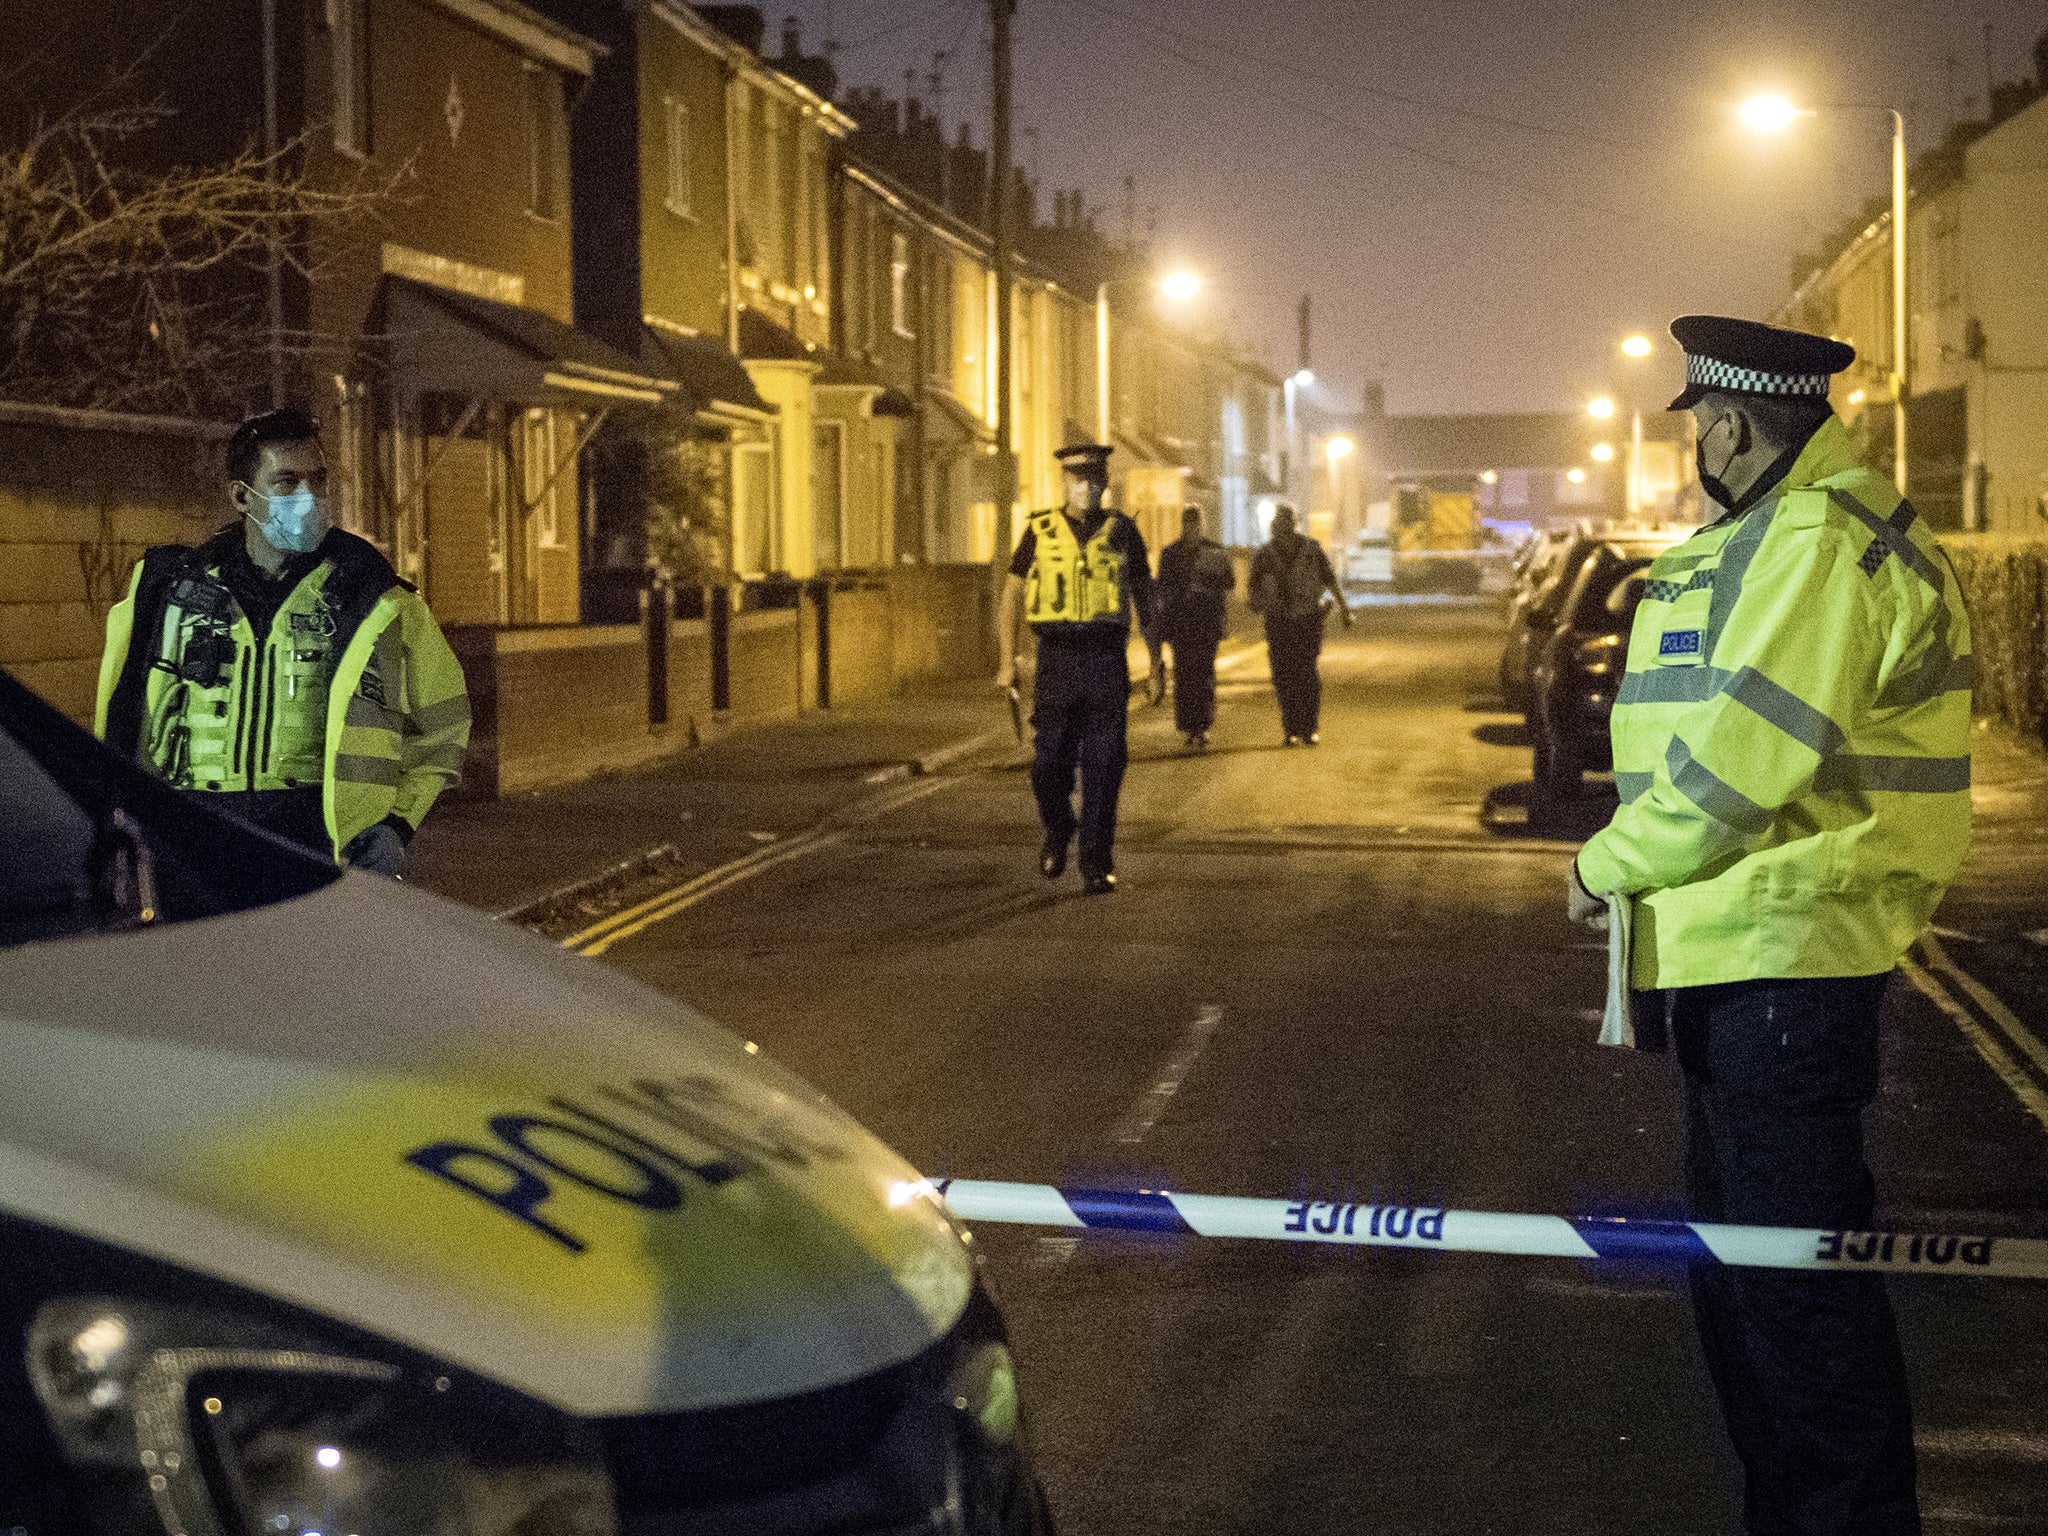 Officers are pictured &nbsp;at the scene of a police shooting in Swindon on 8 November, 2020.&nbsp; &nbsp;